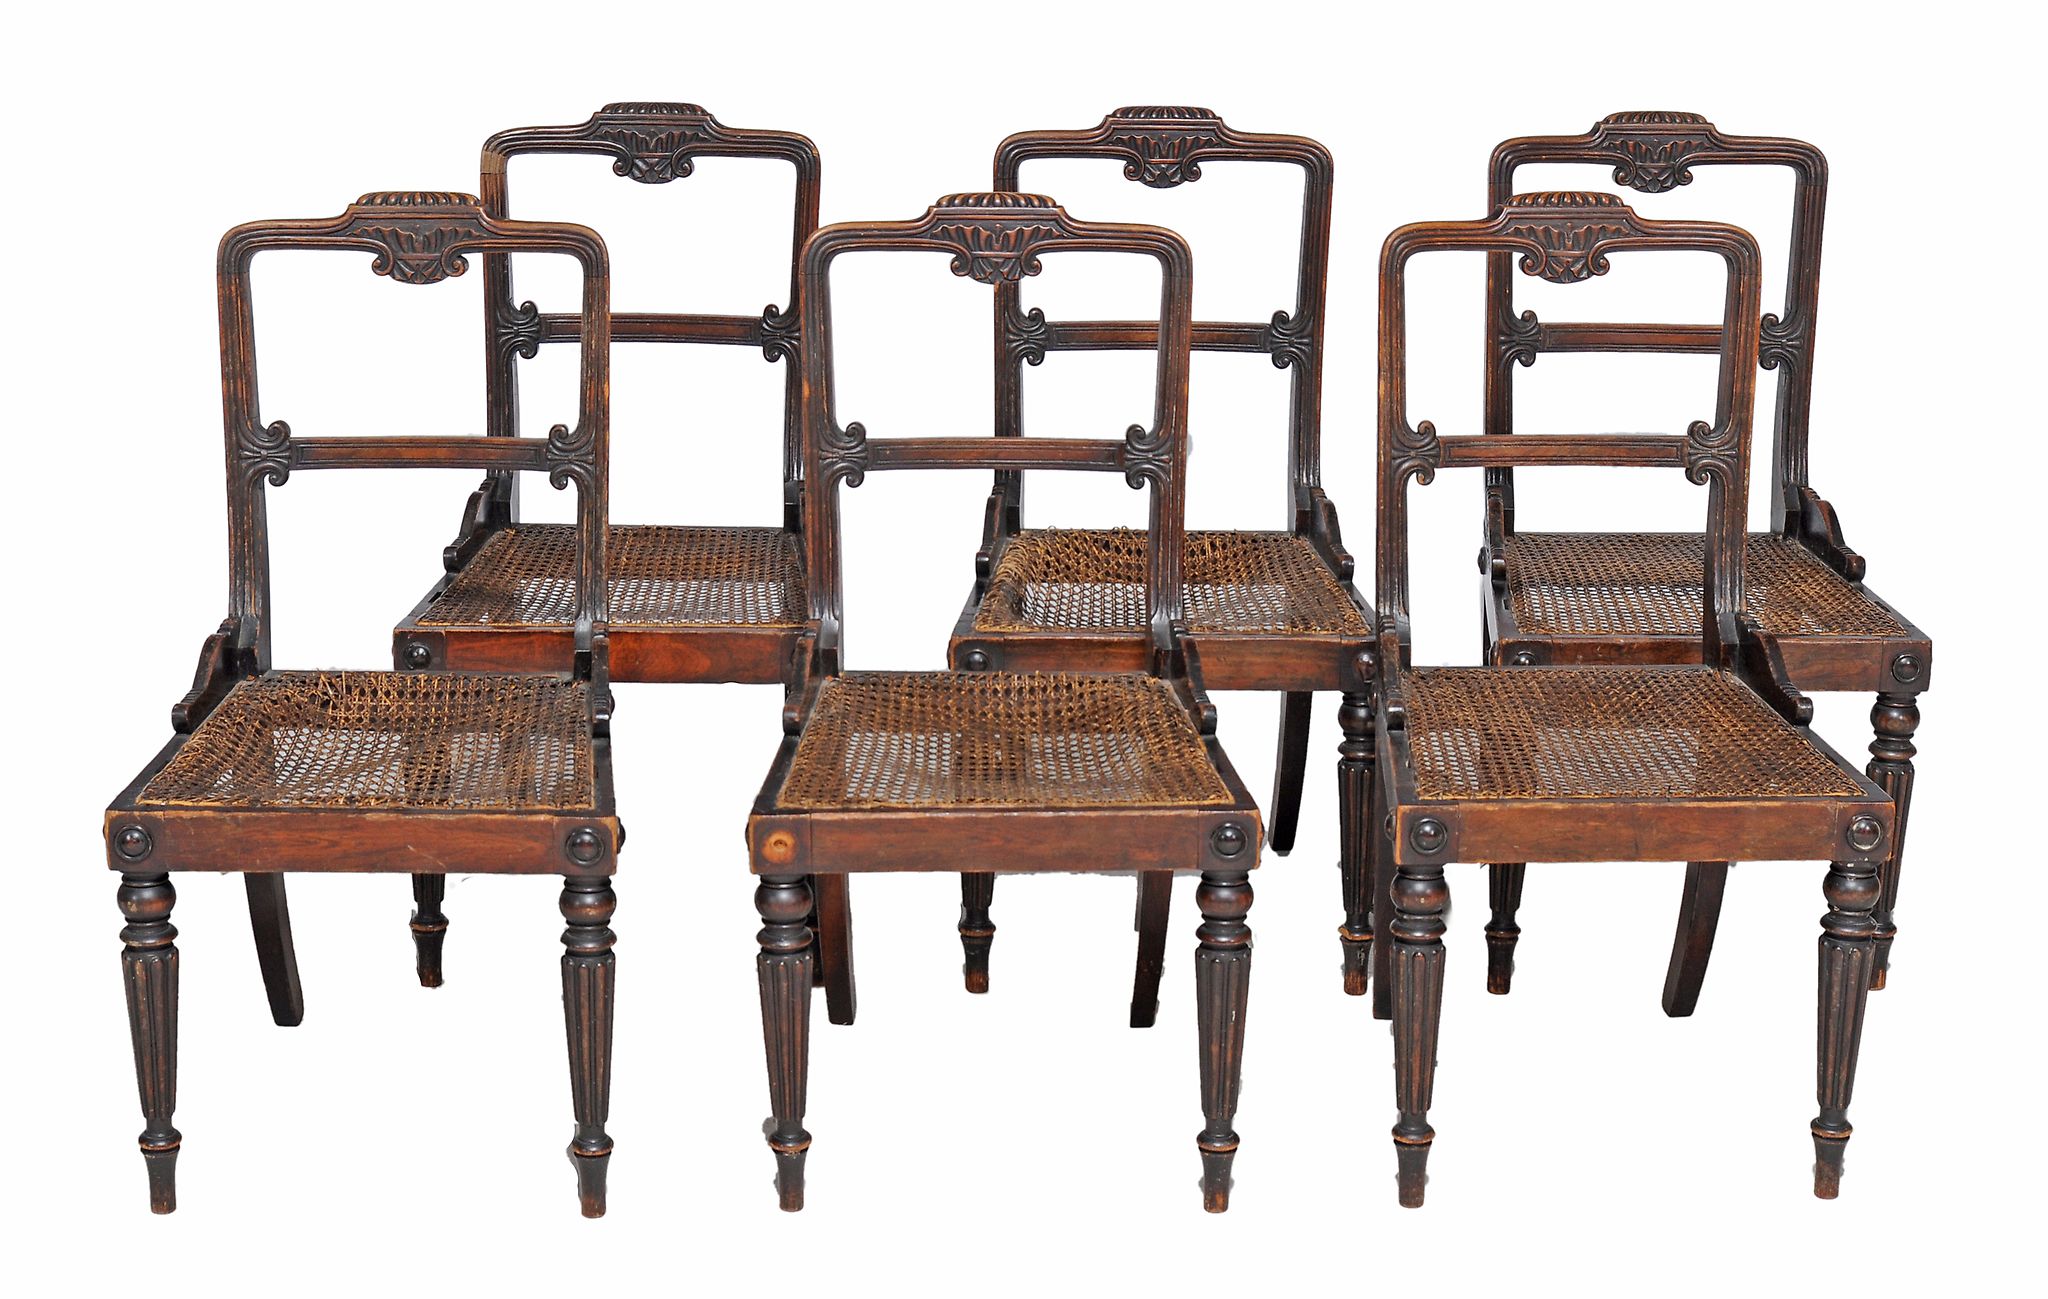 A set of simulated rosewood dining chairs, circa 1815  A set of simulated rosewood dining